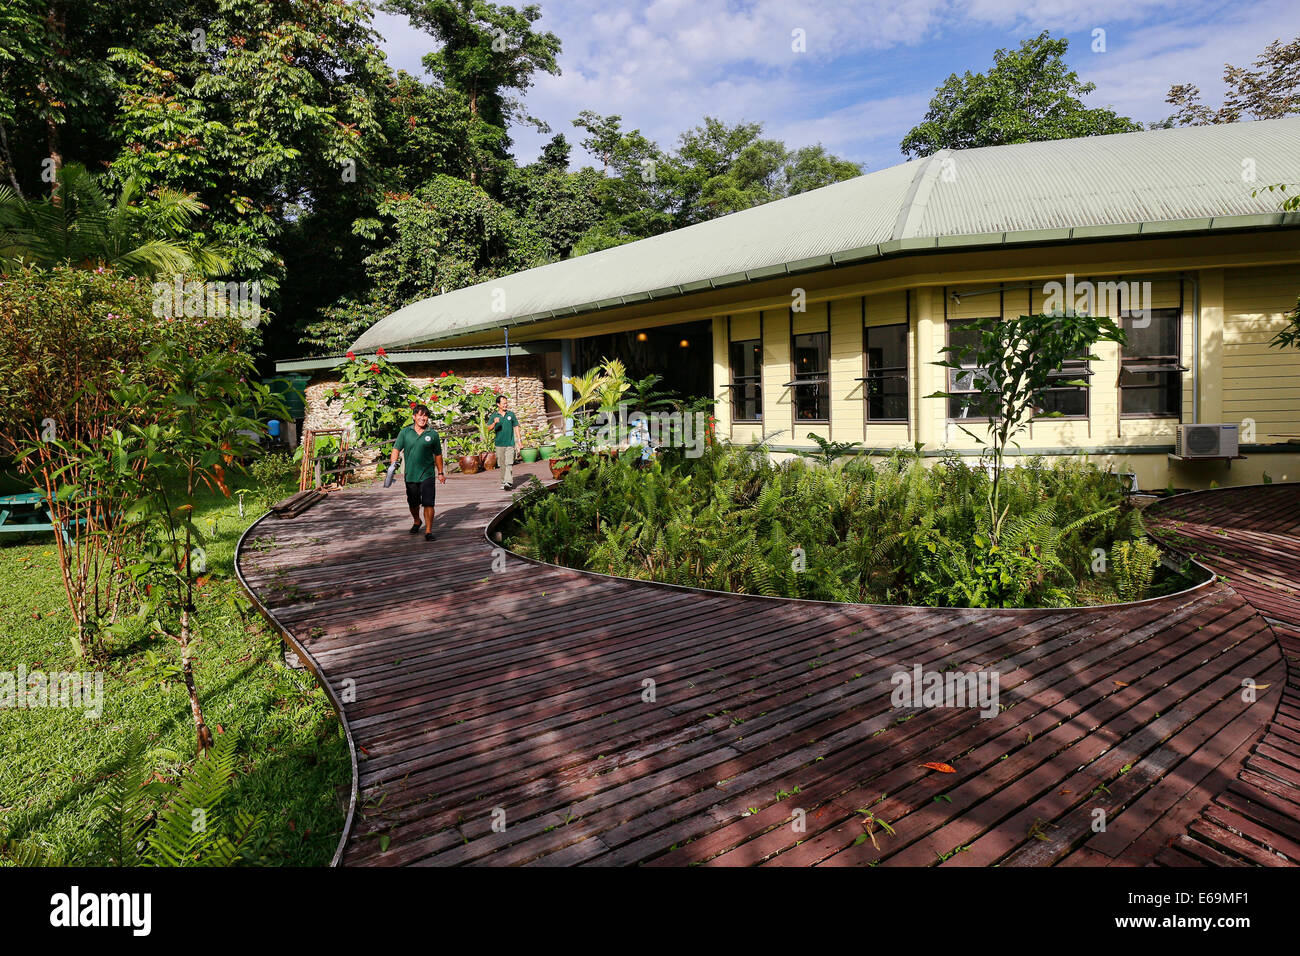 Park employees on boardwalk, Cafe and visitor centre, Mulu national park, Malaysia Stock Photo